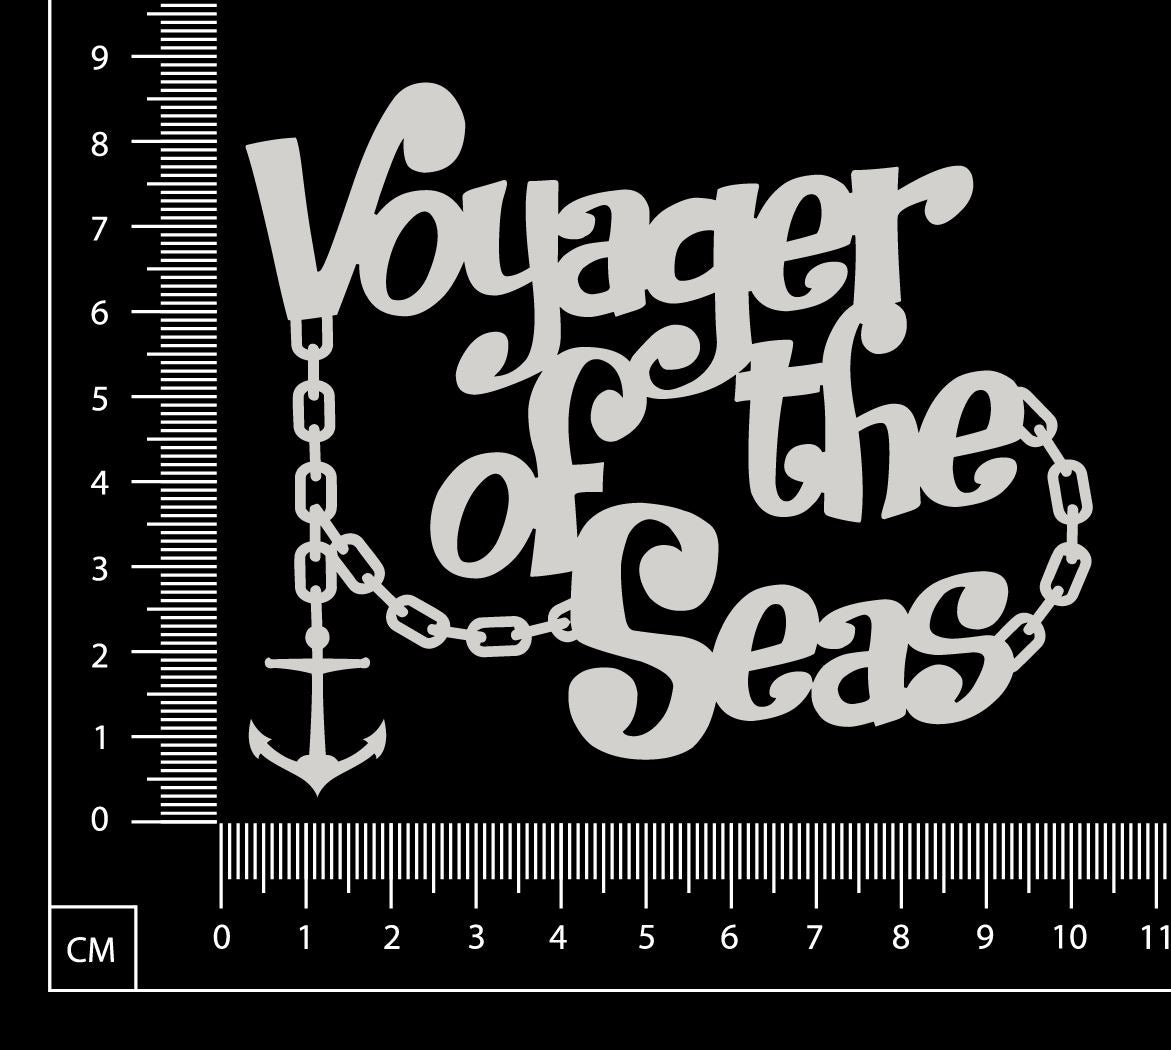 Voyager of the Seas - White Chipboard